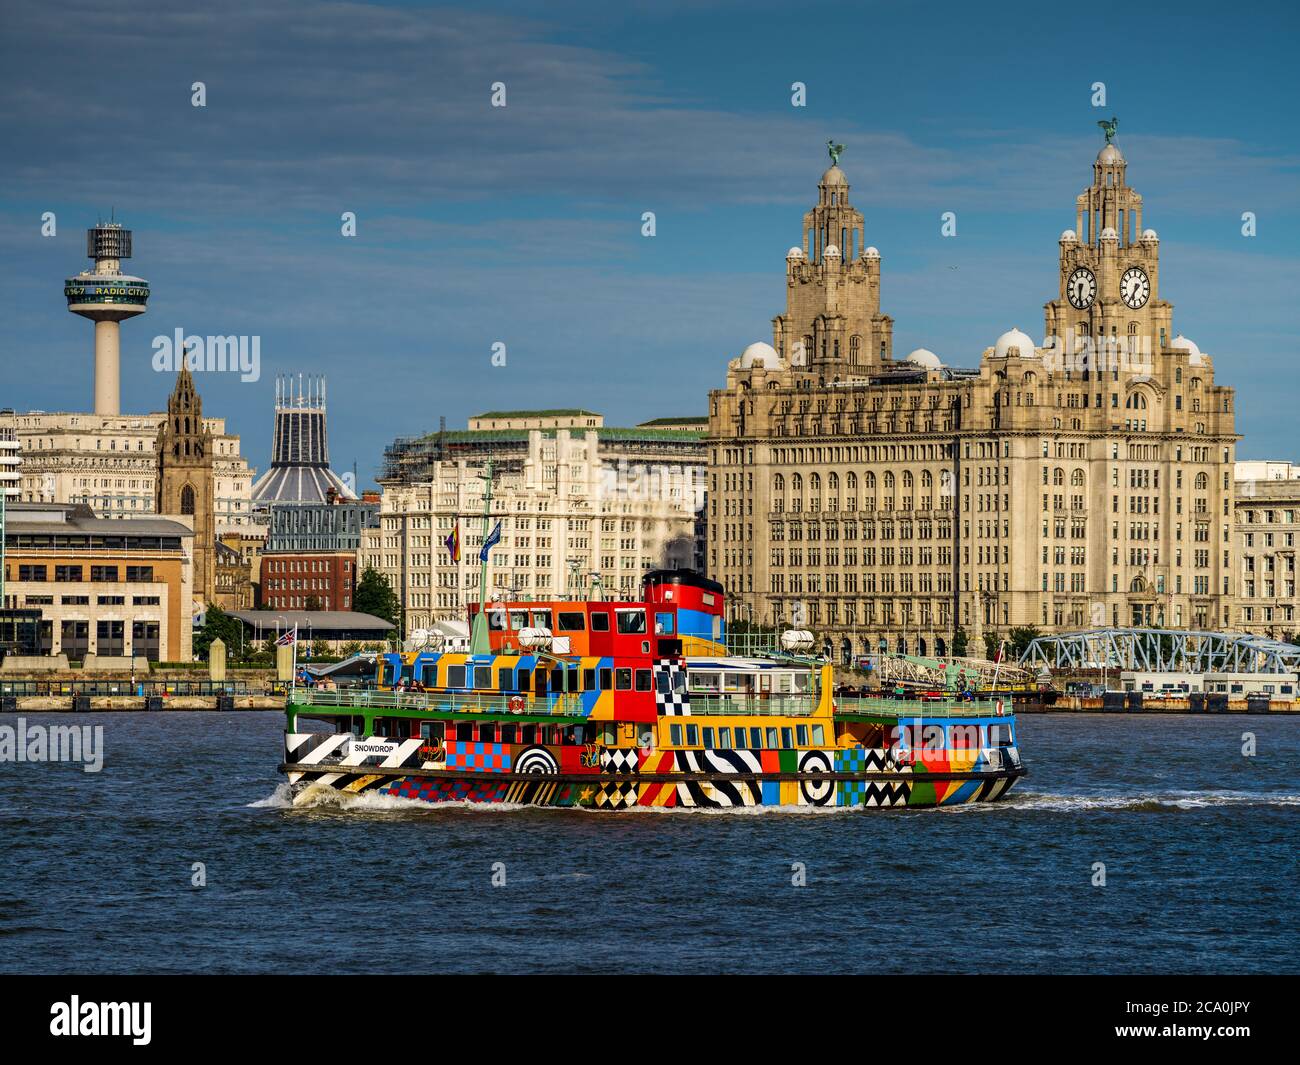 Mersey Ferry passes in front of the Royal Liver Building on the Liverpool waterfront. Built 1908-1911 it's one of the Liverpool Three Graces buildings. Stock Photo